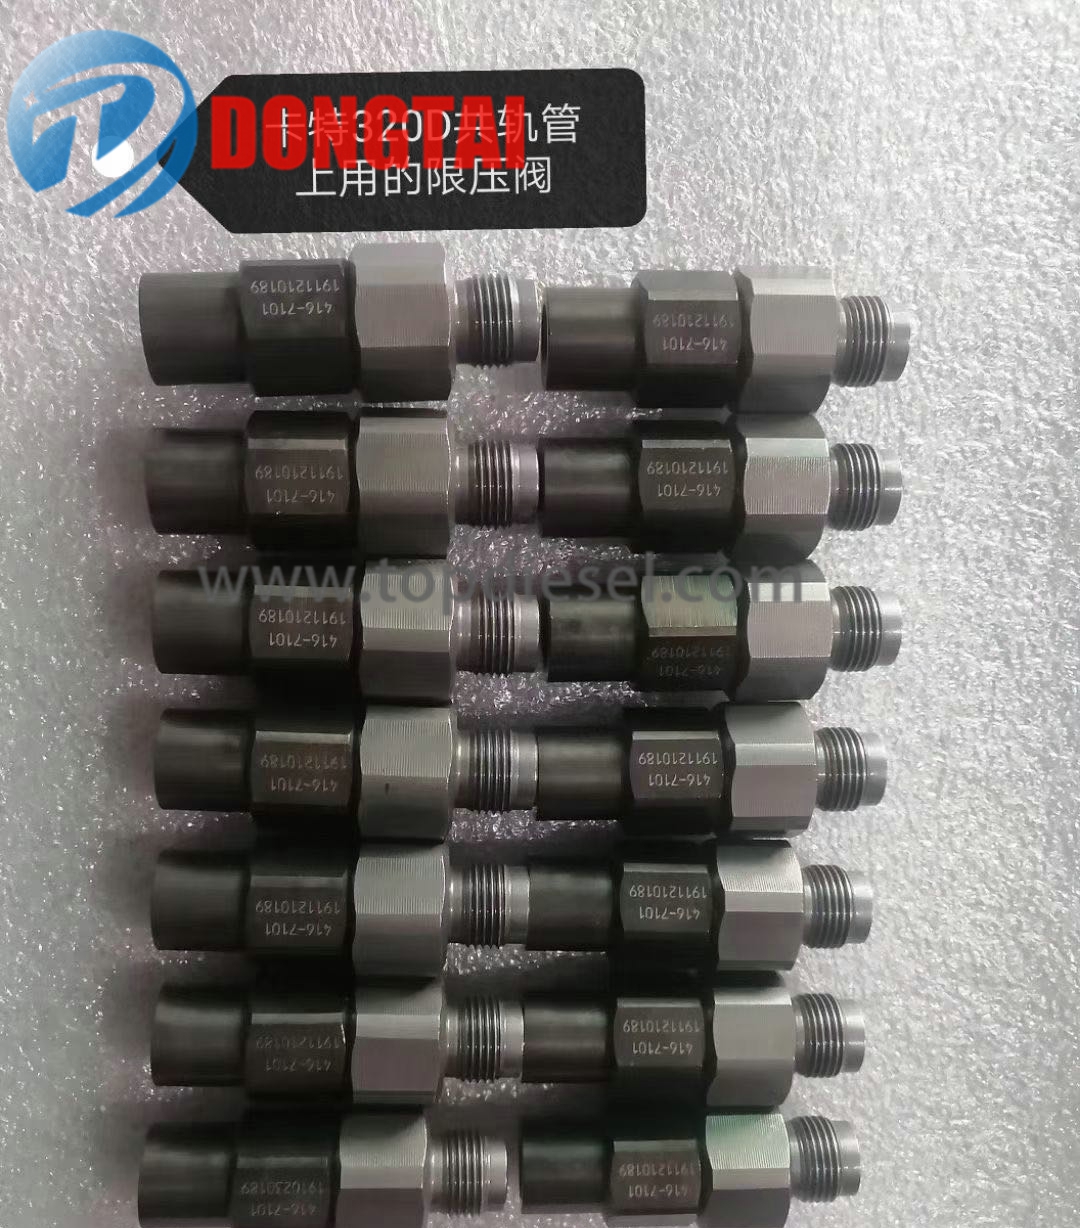 Factory Price For Denso Hand Primer Pump - NO.554(12)CAT 320D Rail Pressure Limiting Valve 416-7101 – Dongtai